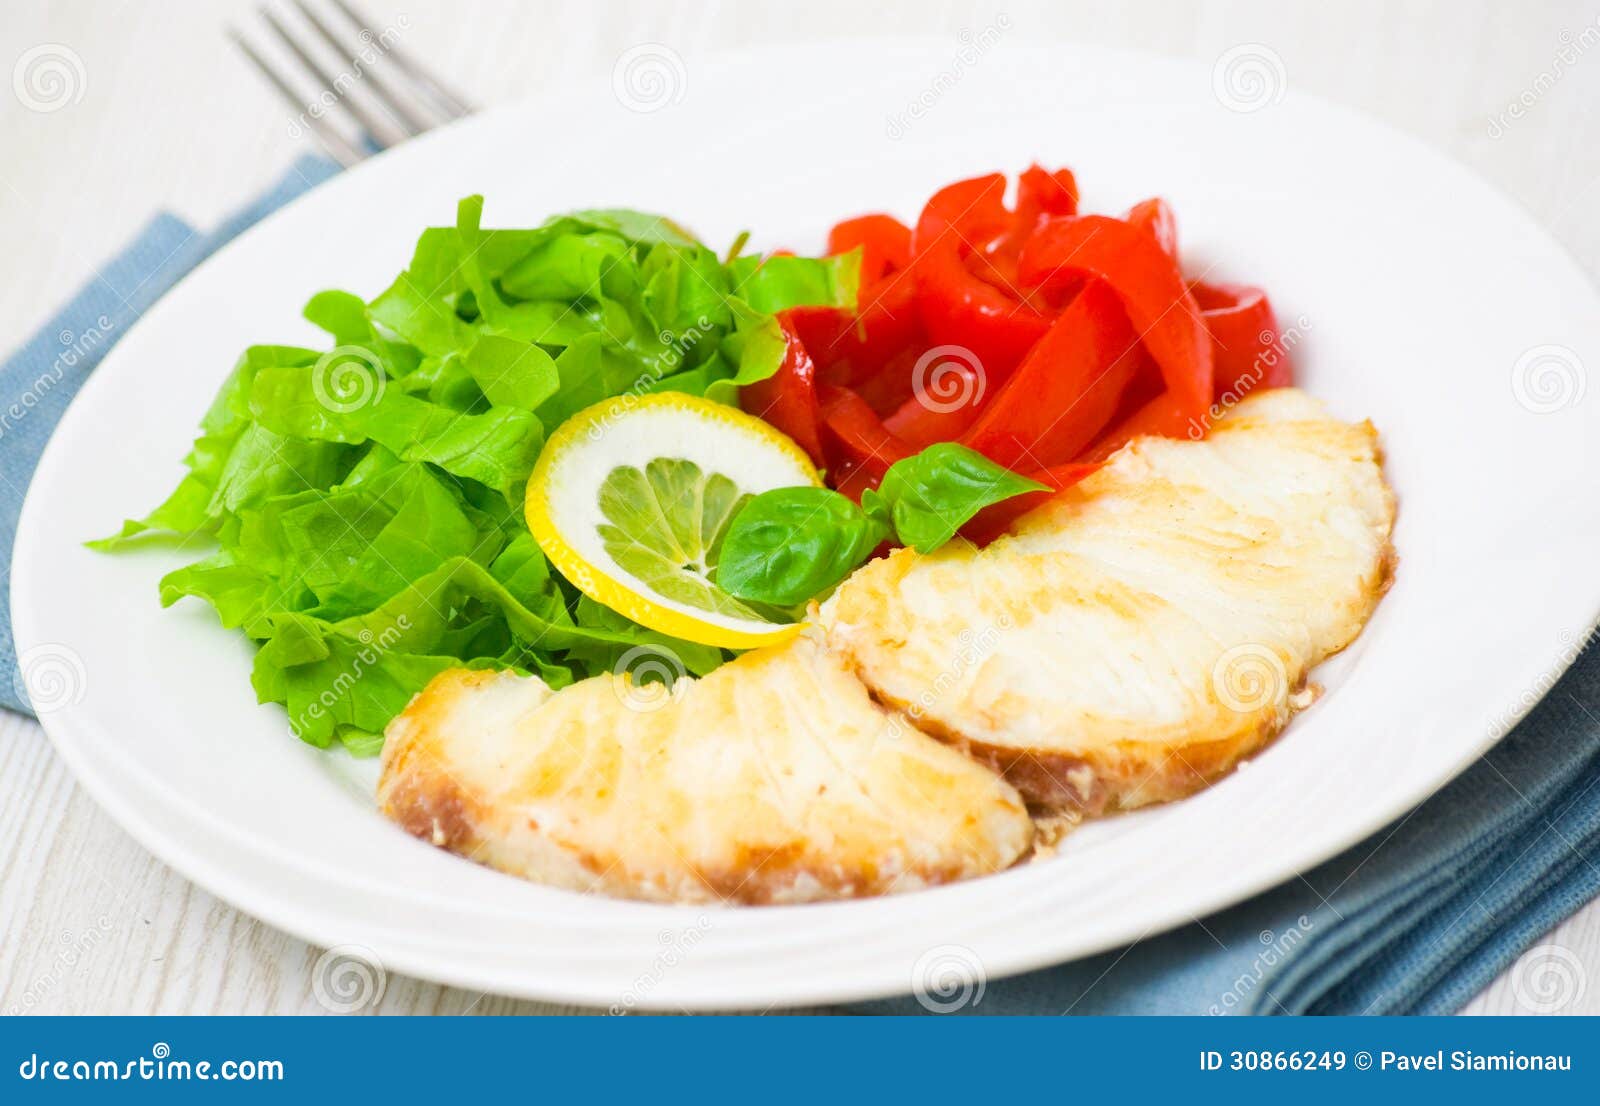 White Fish Fillet with Vegetables Stock Image - Image of nutritional ...